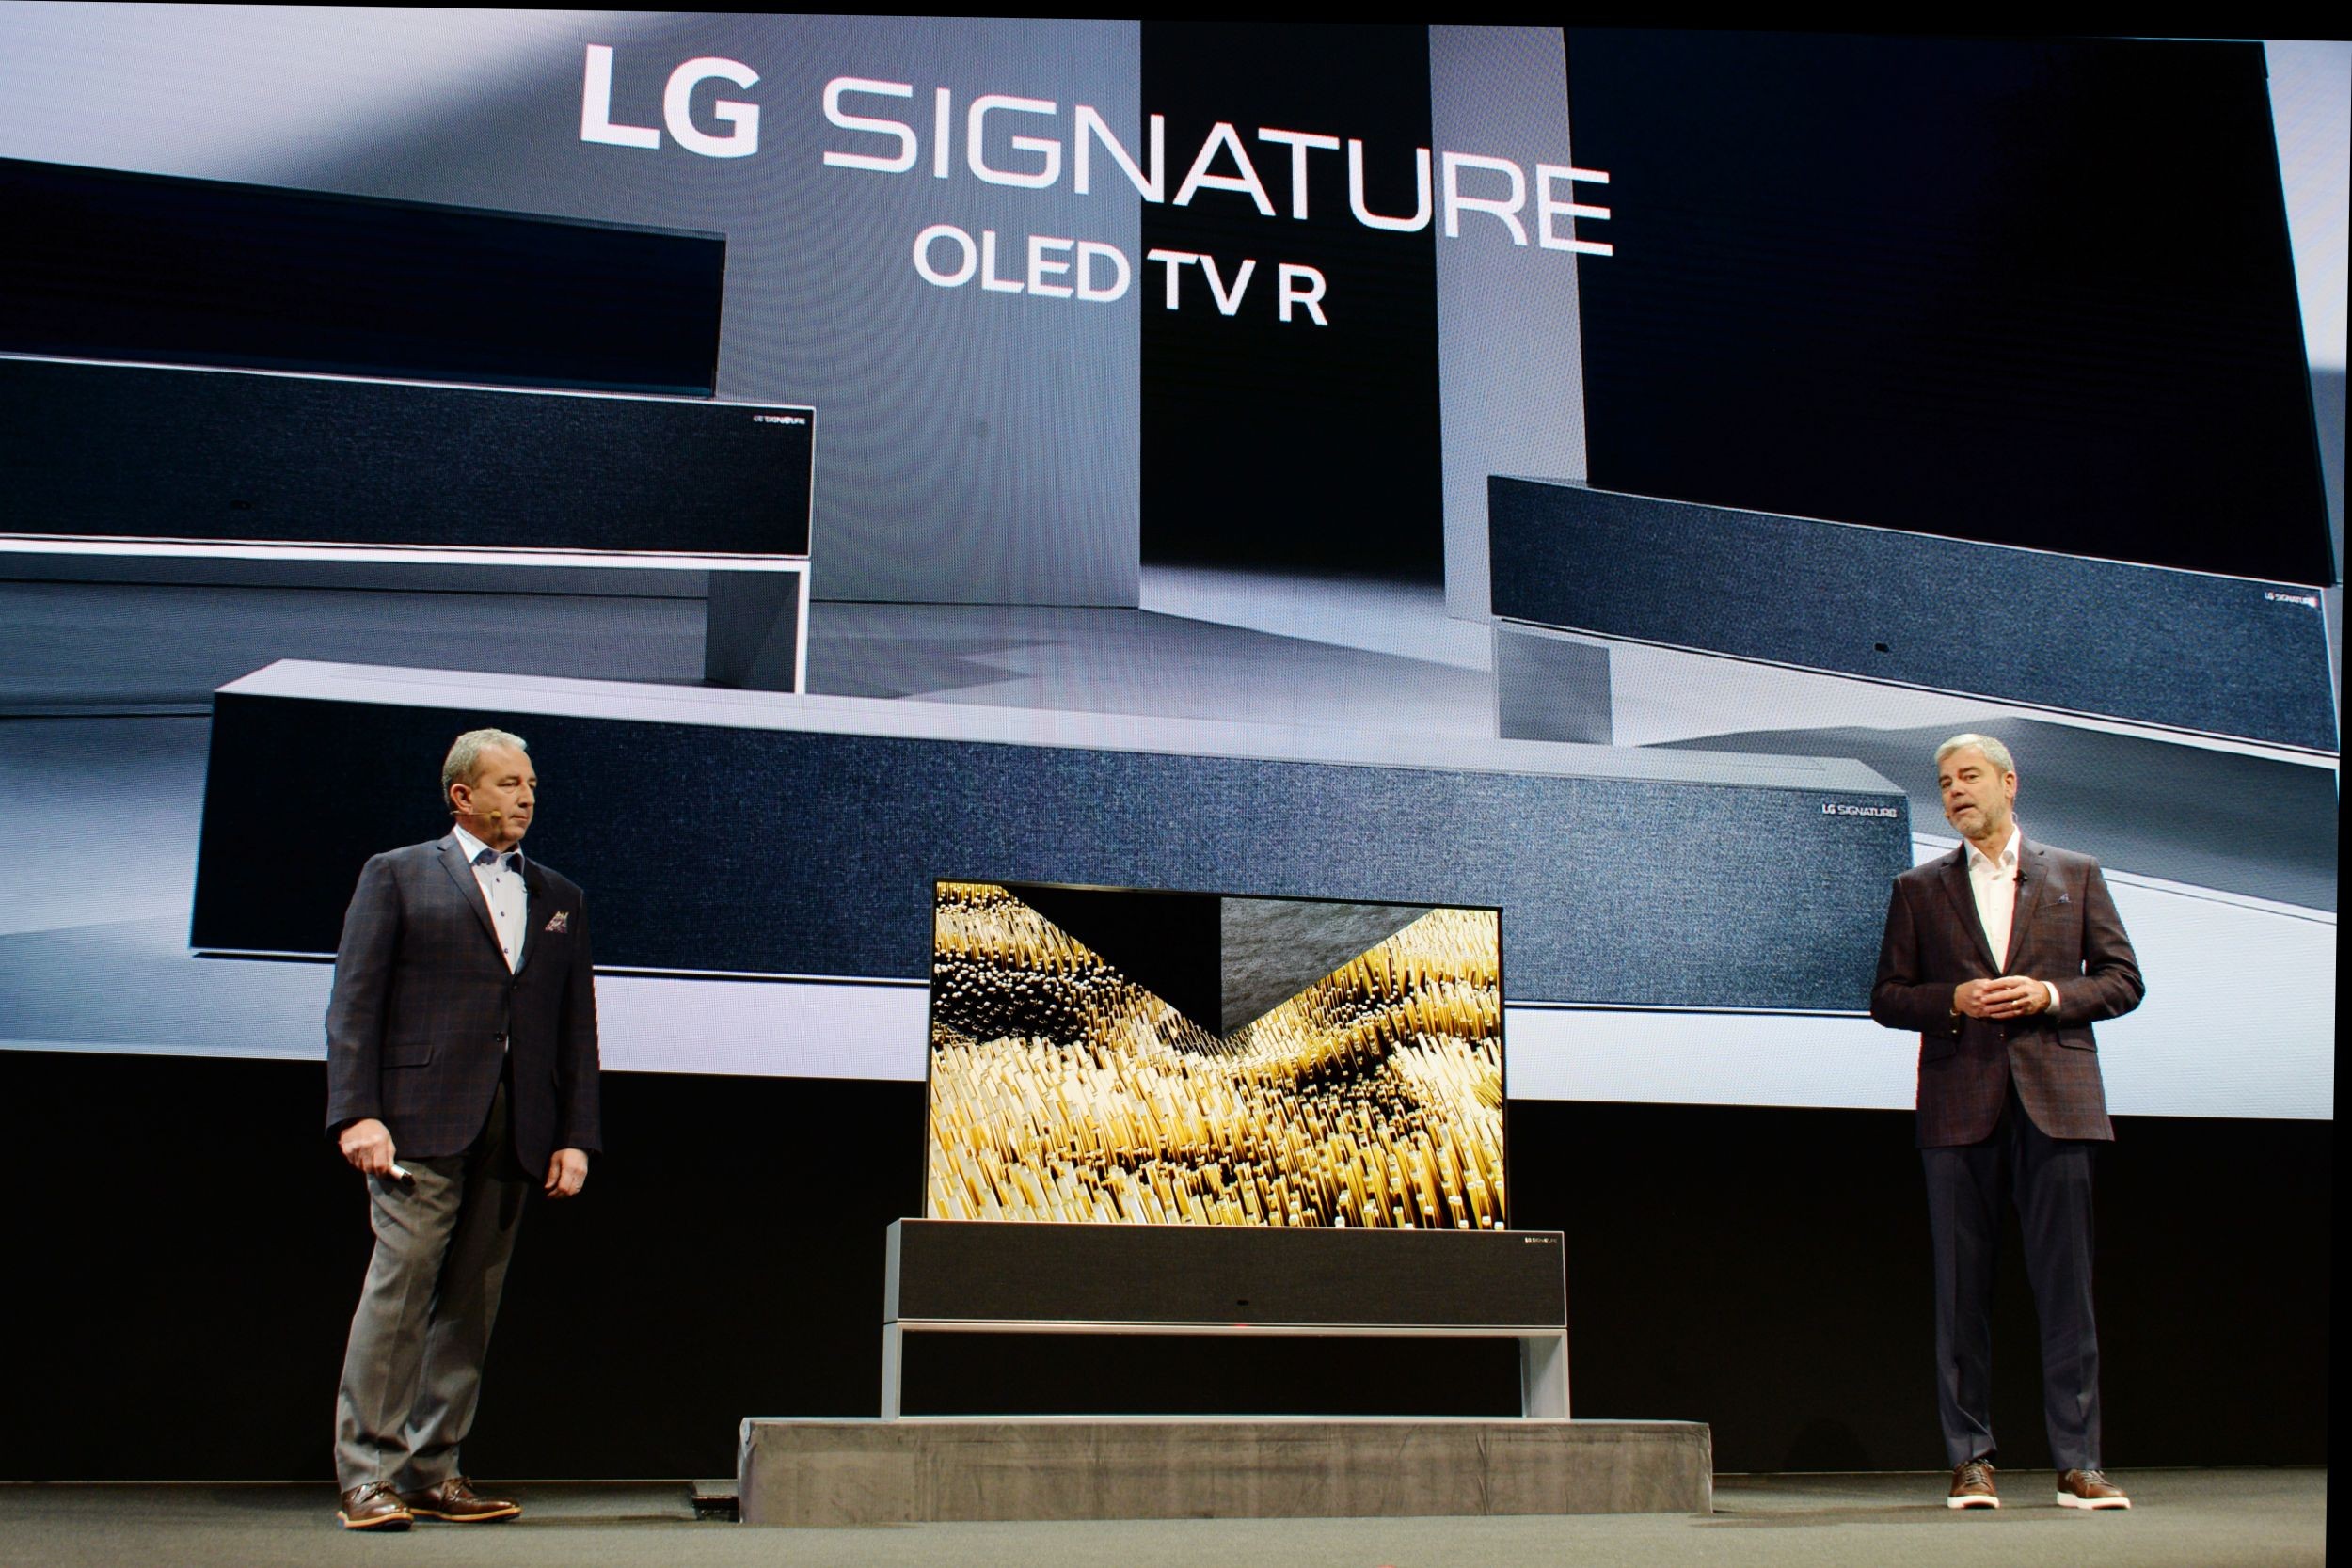 David VanderWall, Senior Vice President of Marketing at LG Electronics USA and Tim Alessi Senior Director of Product Marketing for Home Entertainment Products at LG Electronics USA are onstage discussing the LG SIGNATURE OLED TV R at LG's CES 2019 Press Conference while putting the TV between them.